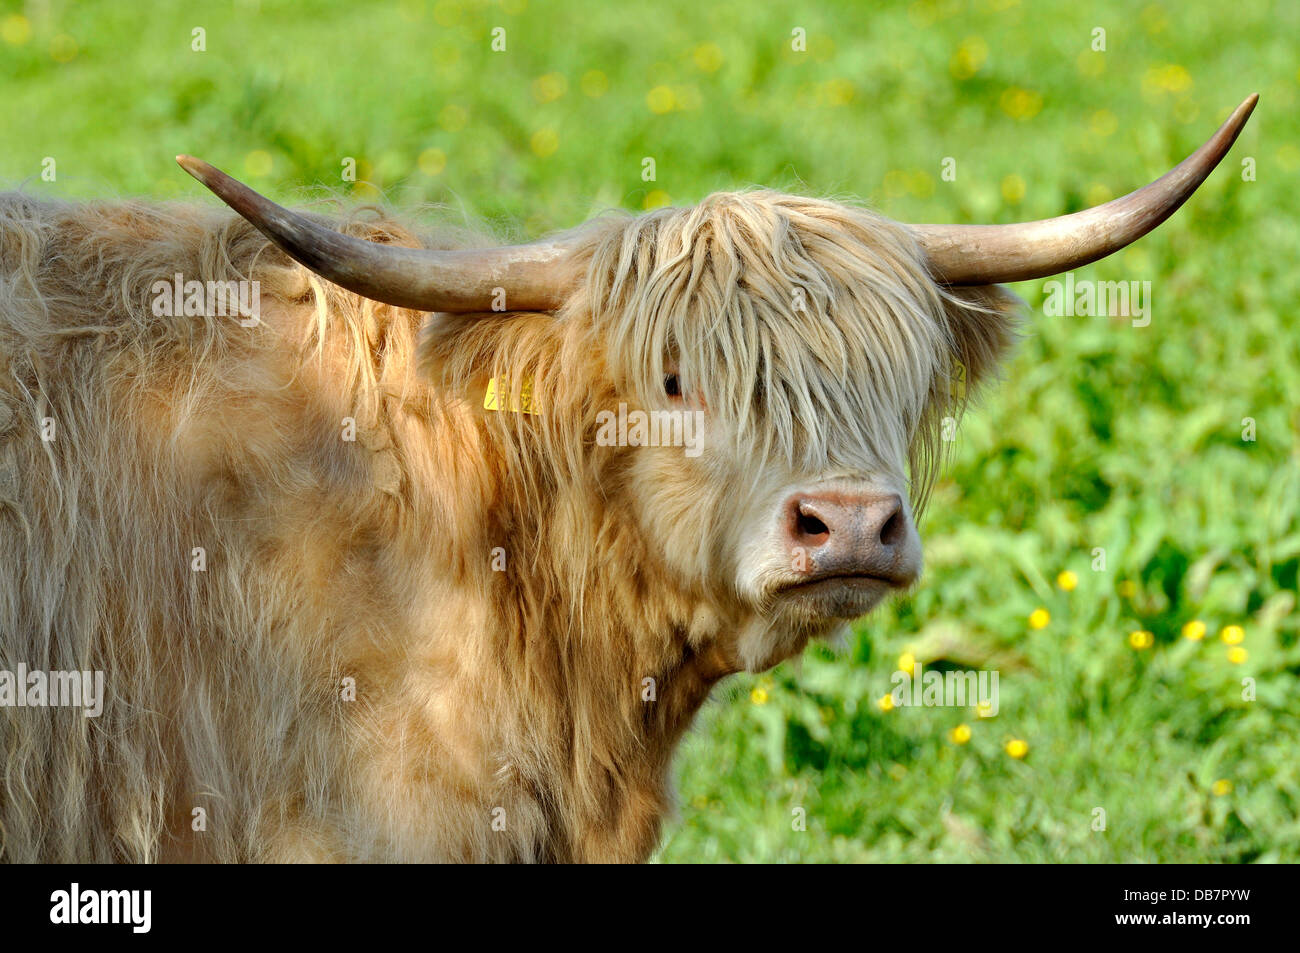 Scottish Highland Cattle or Kyloe (Bos primigenius f. taurus) in a meadow Stock Photo